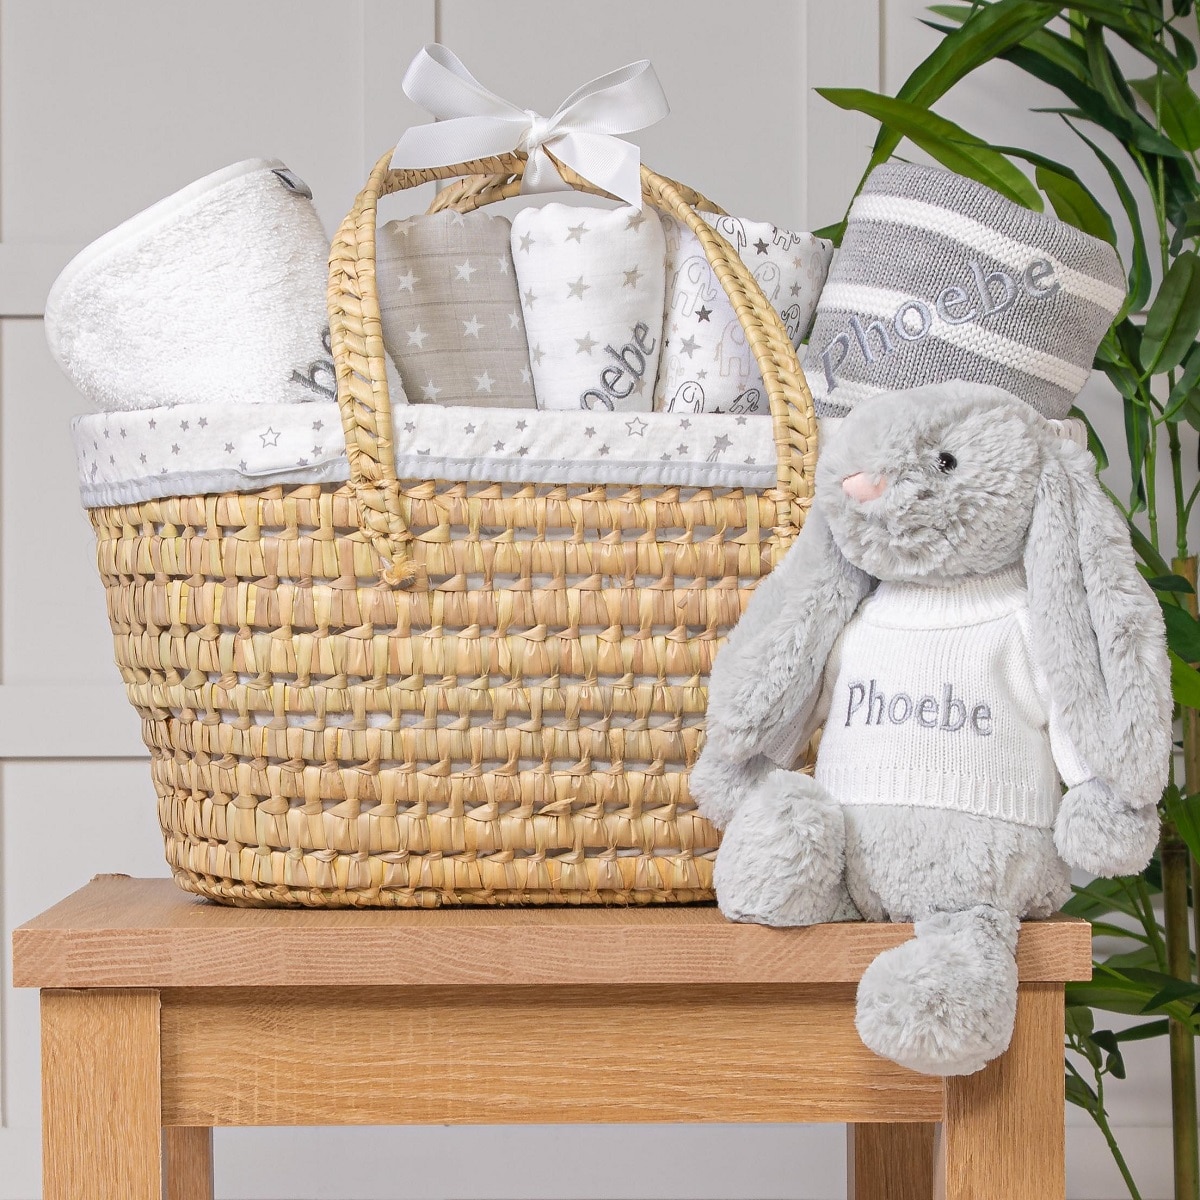 Personalised newborn baby gift basket with bunny soft toy